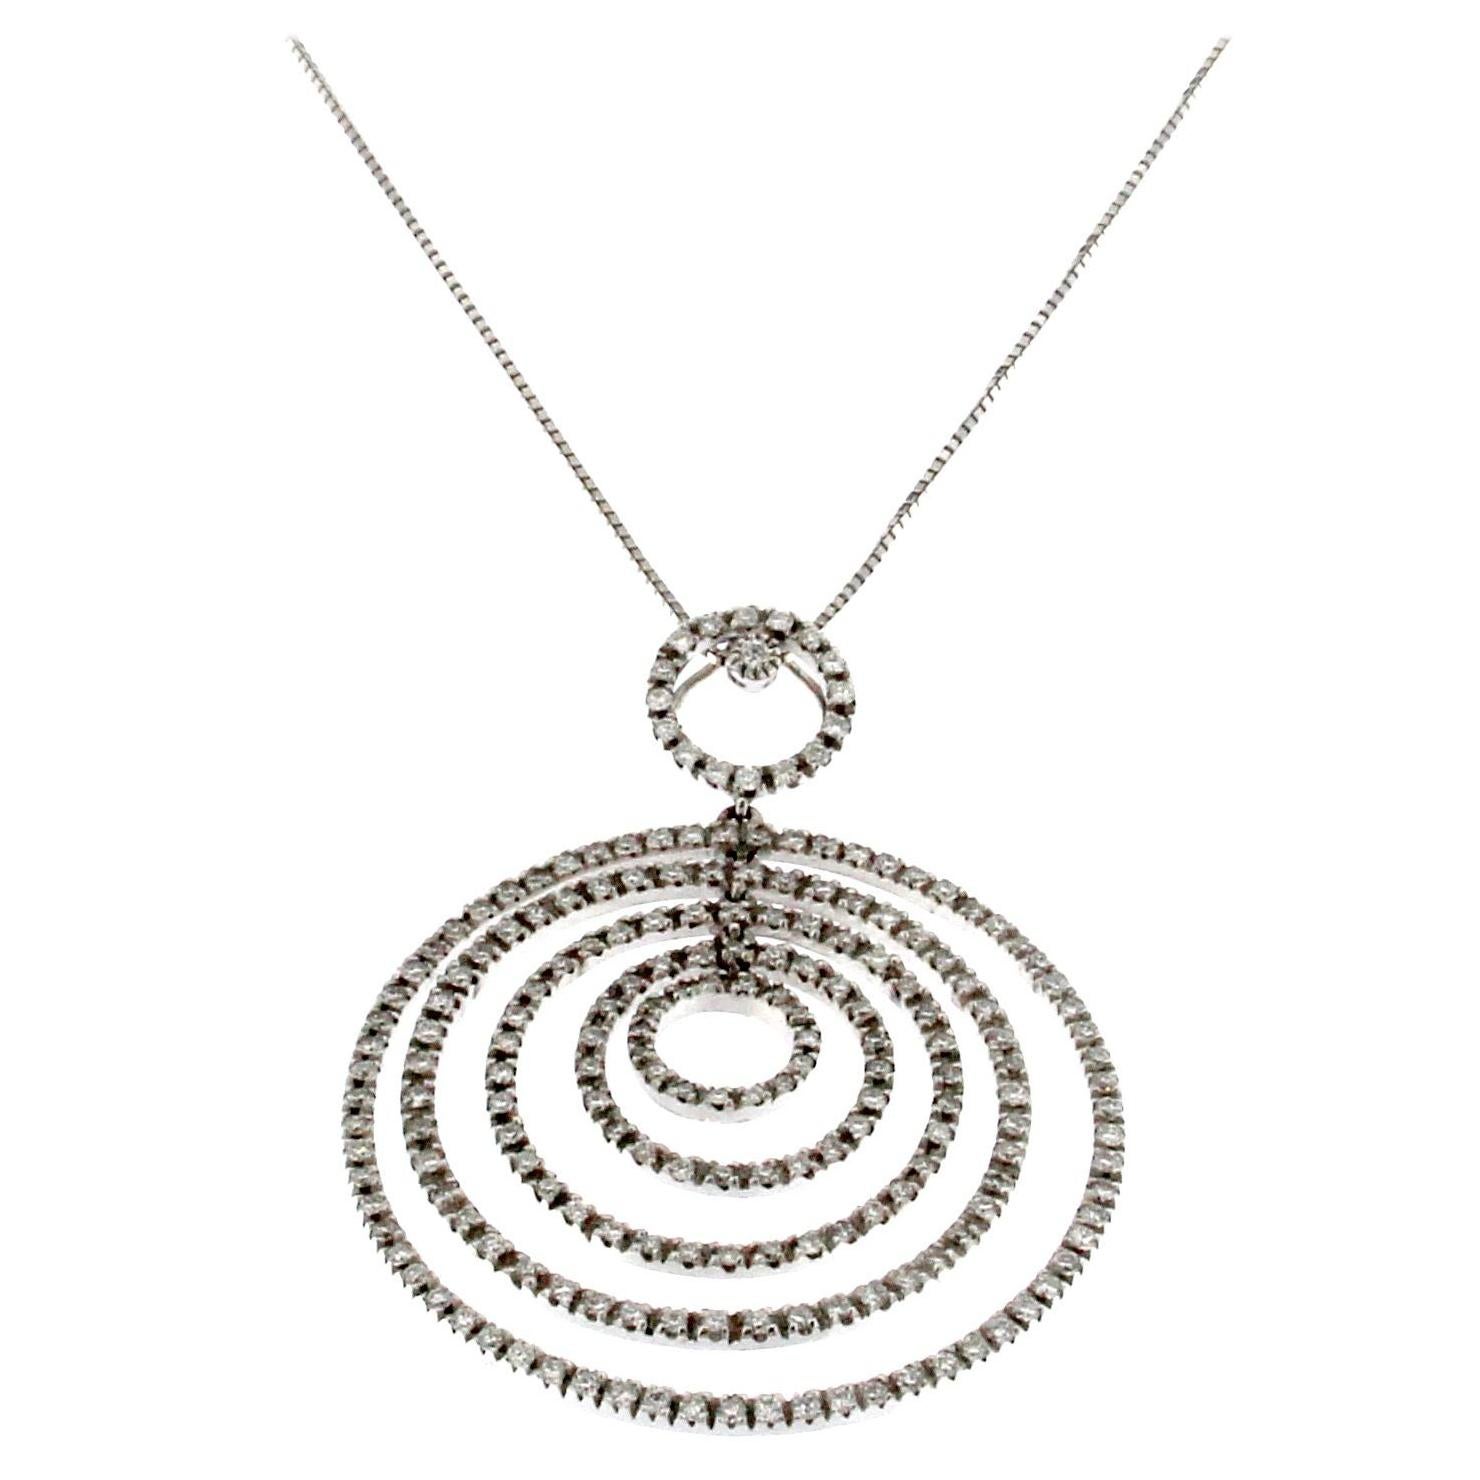 Pendent from the Collection "Fulcrum" 18 Karat White Gold and Diamonds